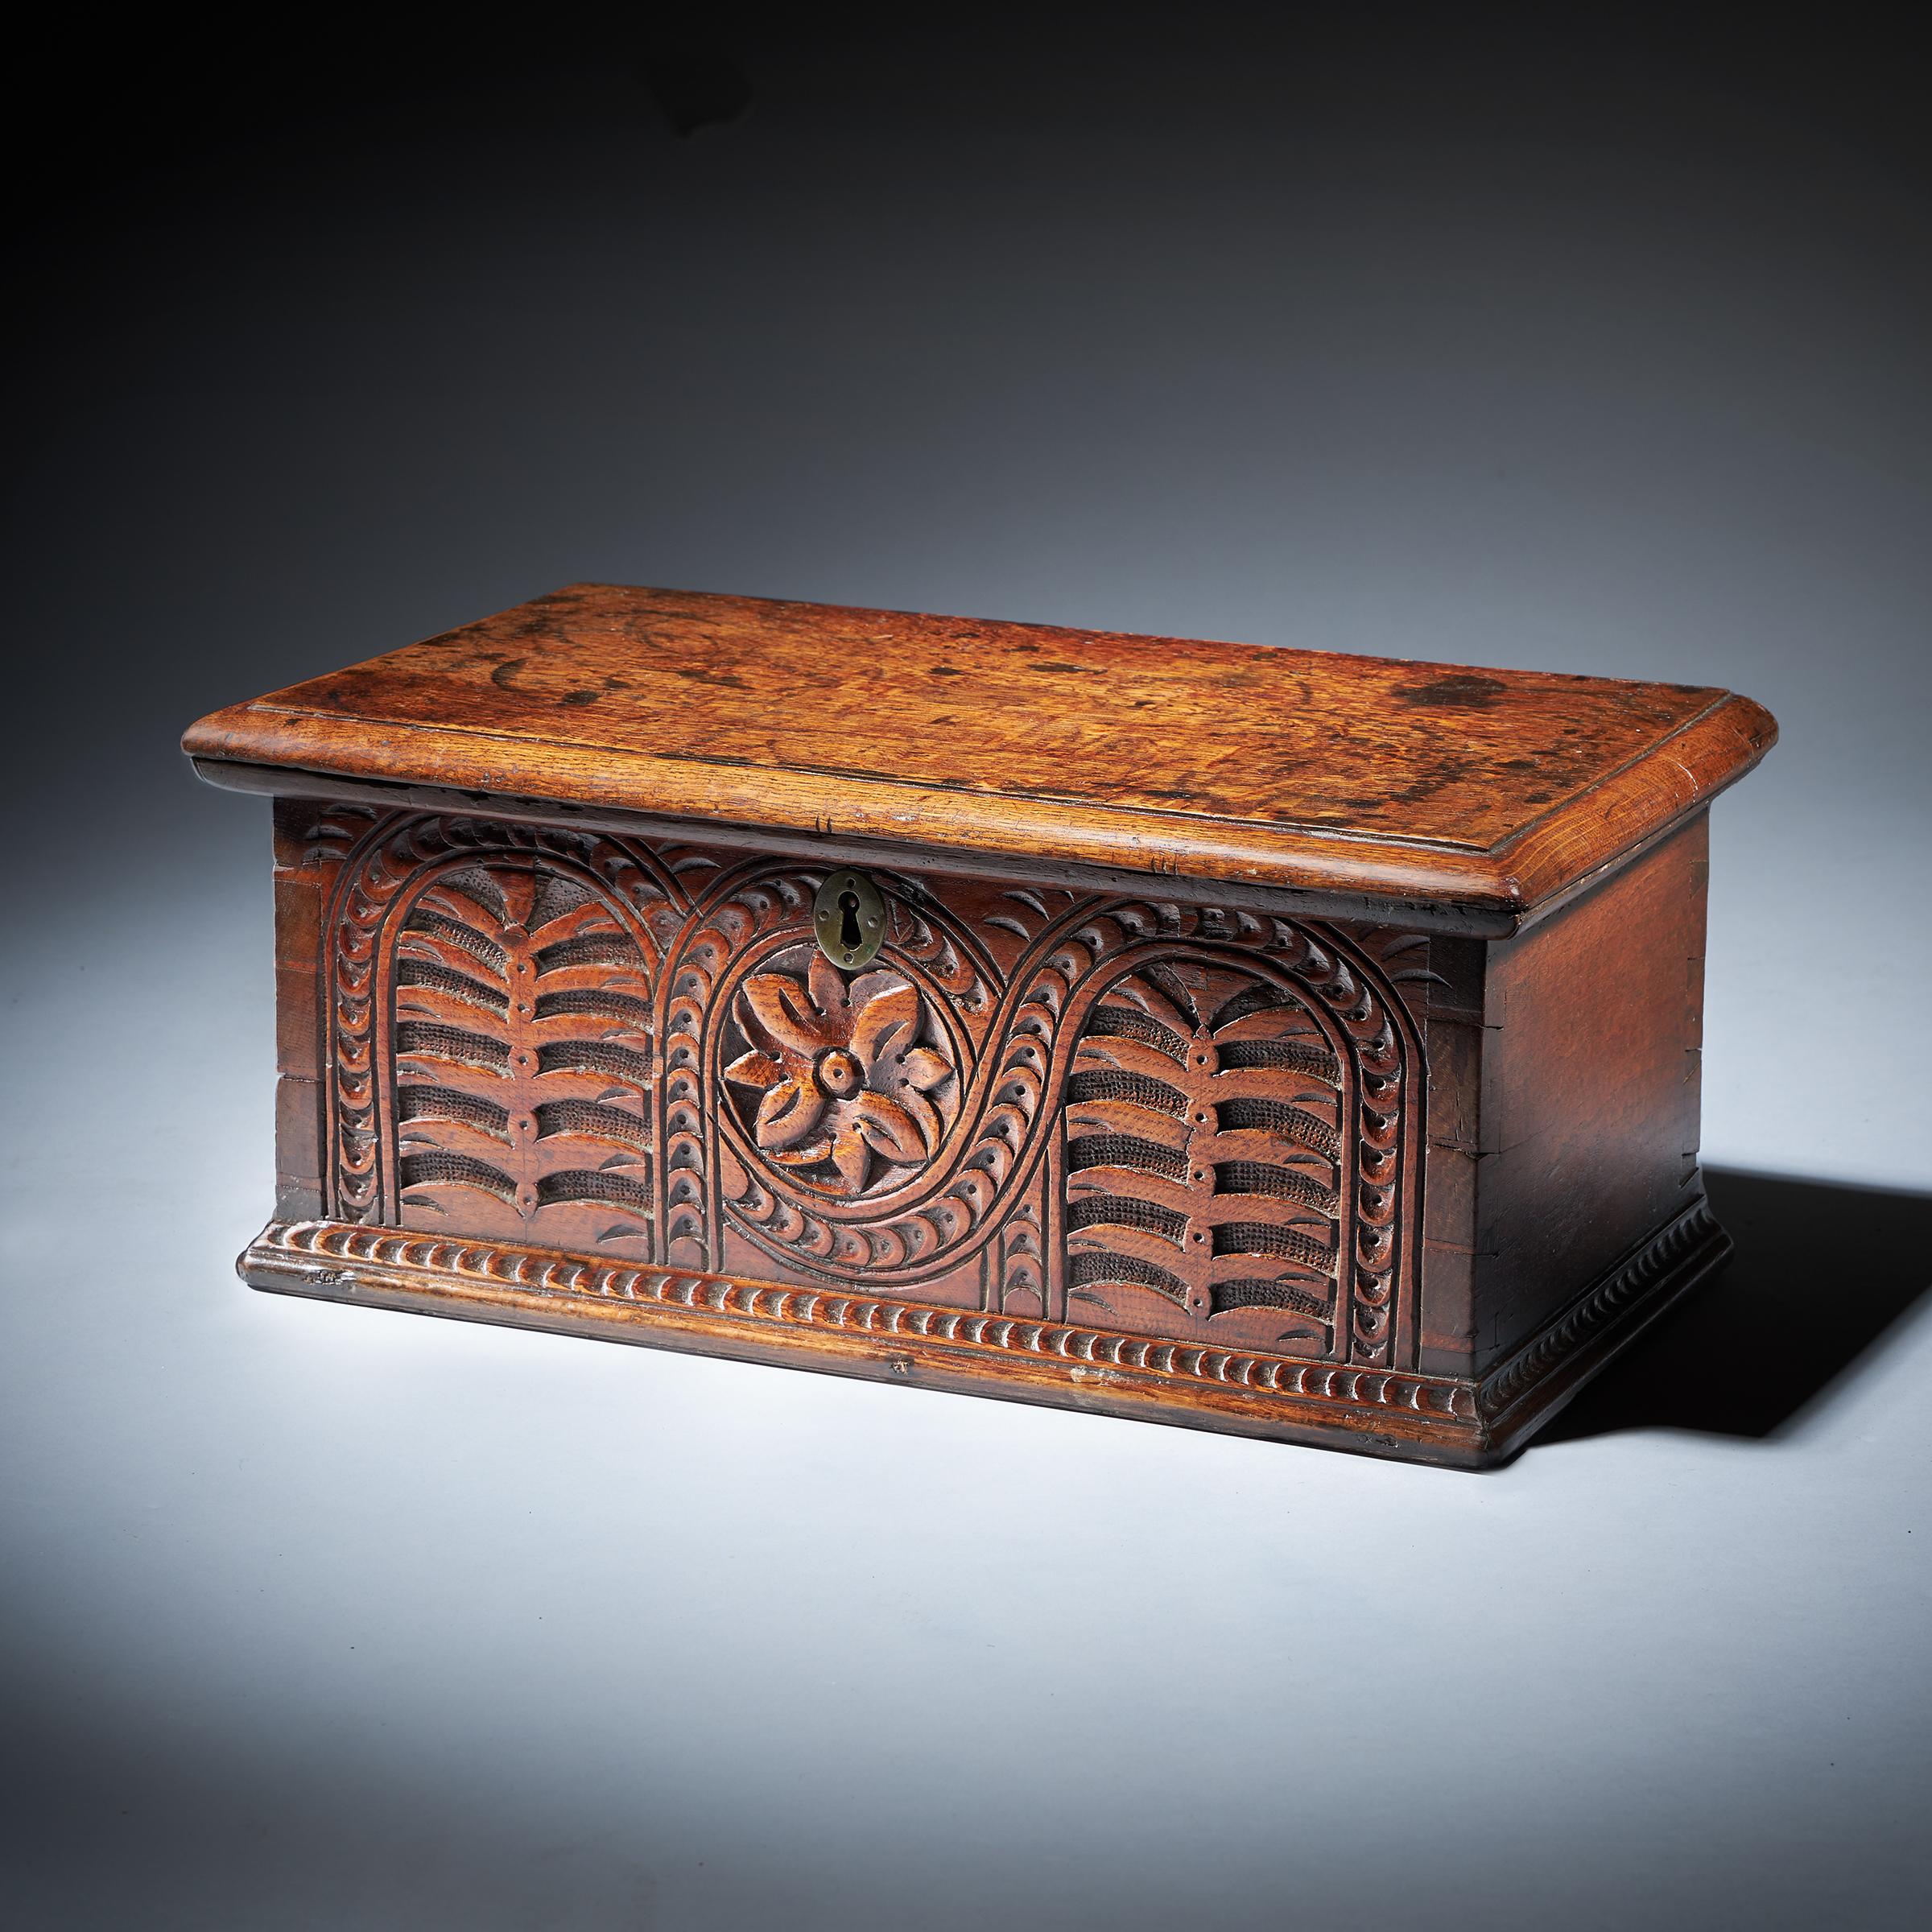 English Rare William and Mary 17th Century Carved Oak Deeds Box of Small Proportions